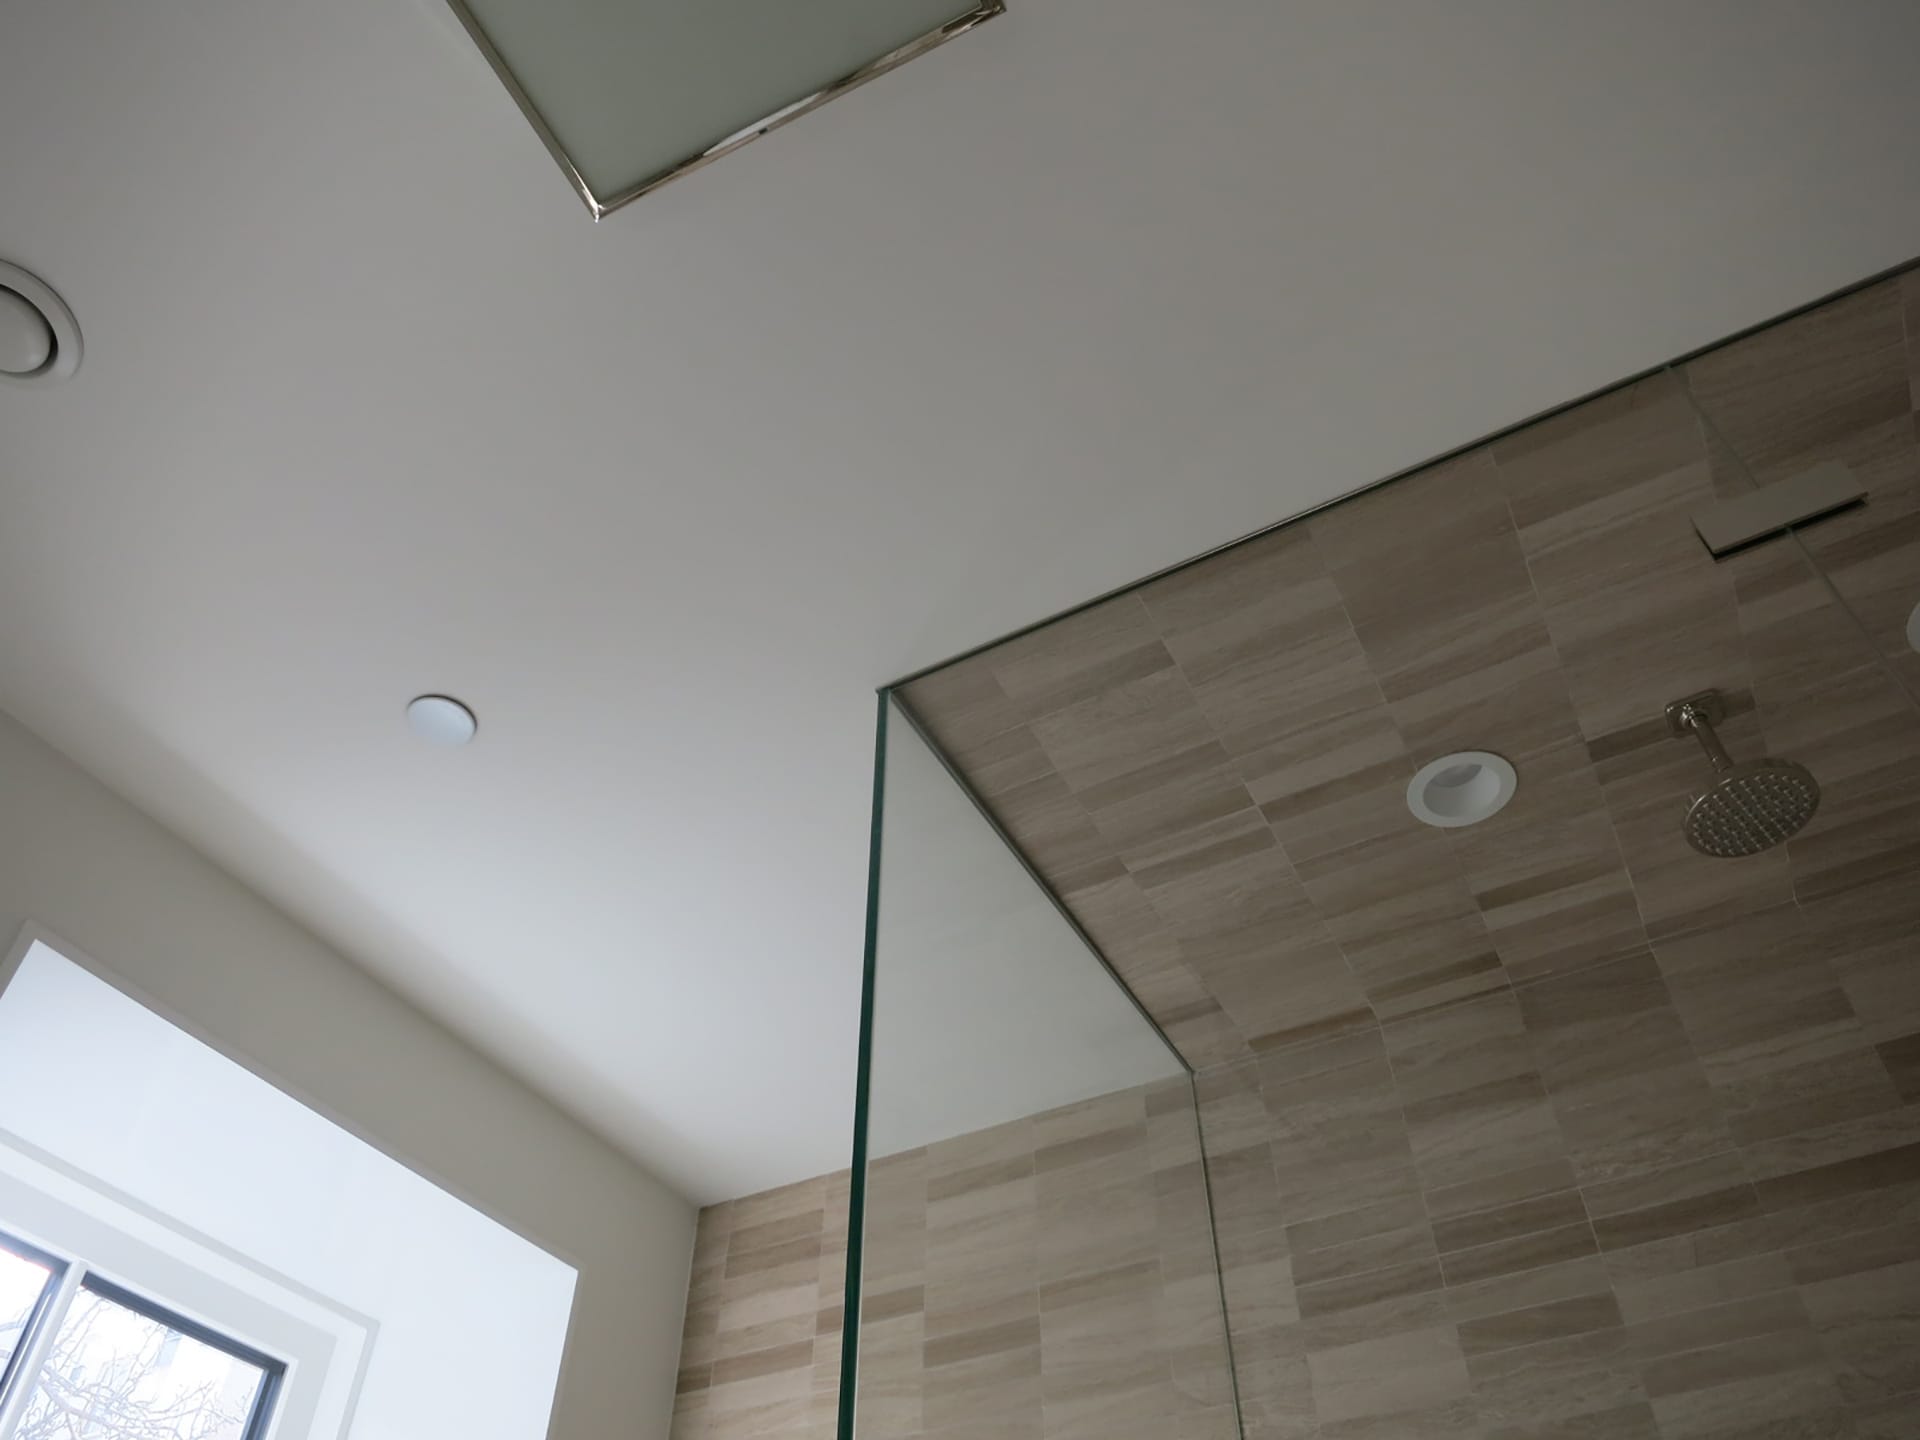 Corner of a glass steam shower with recessed ceiling tiles.